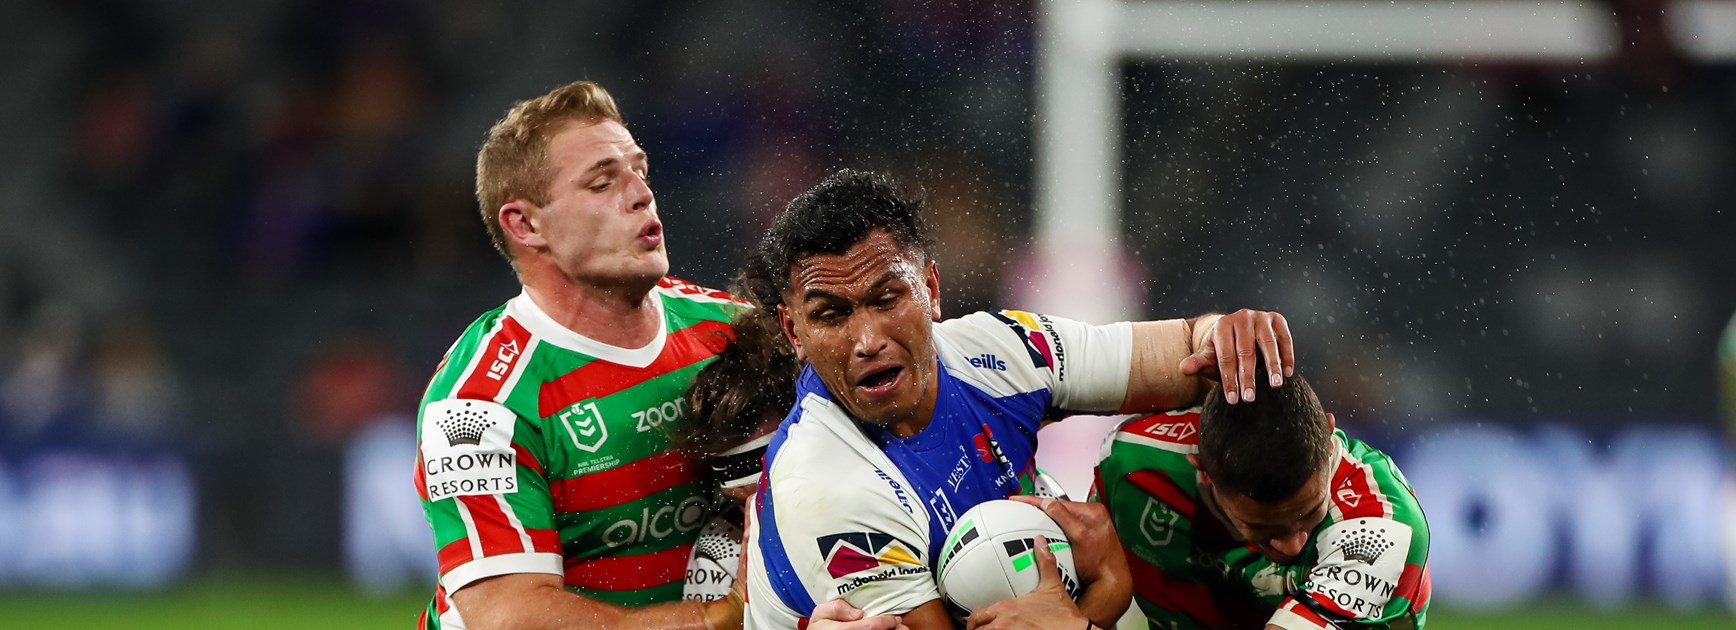 Knights face Rabbitohs in week 1 of 2020 finals